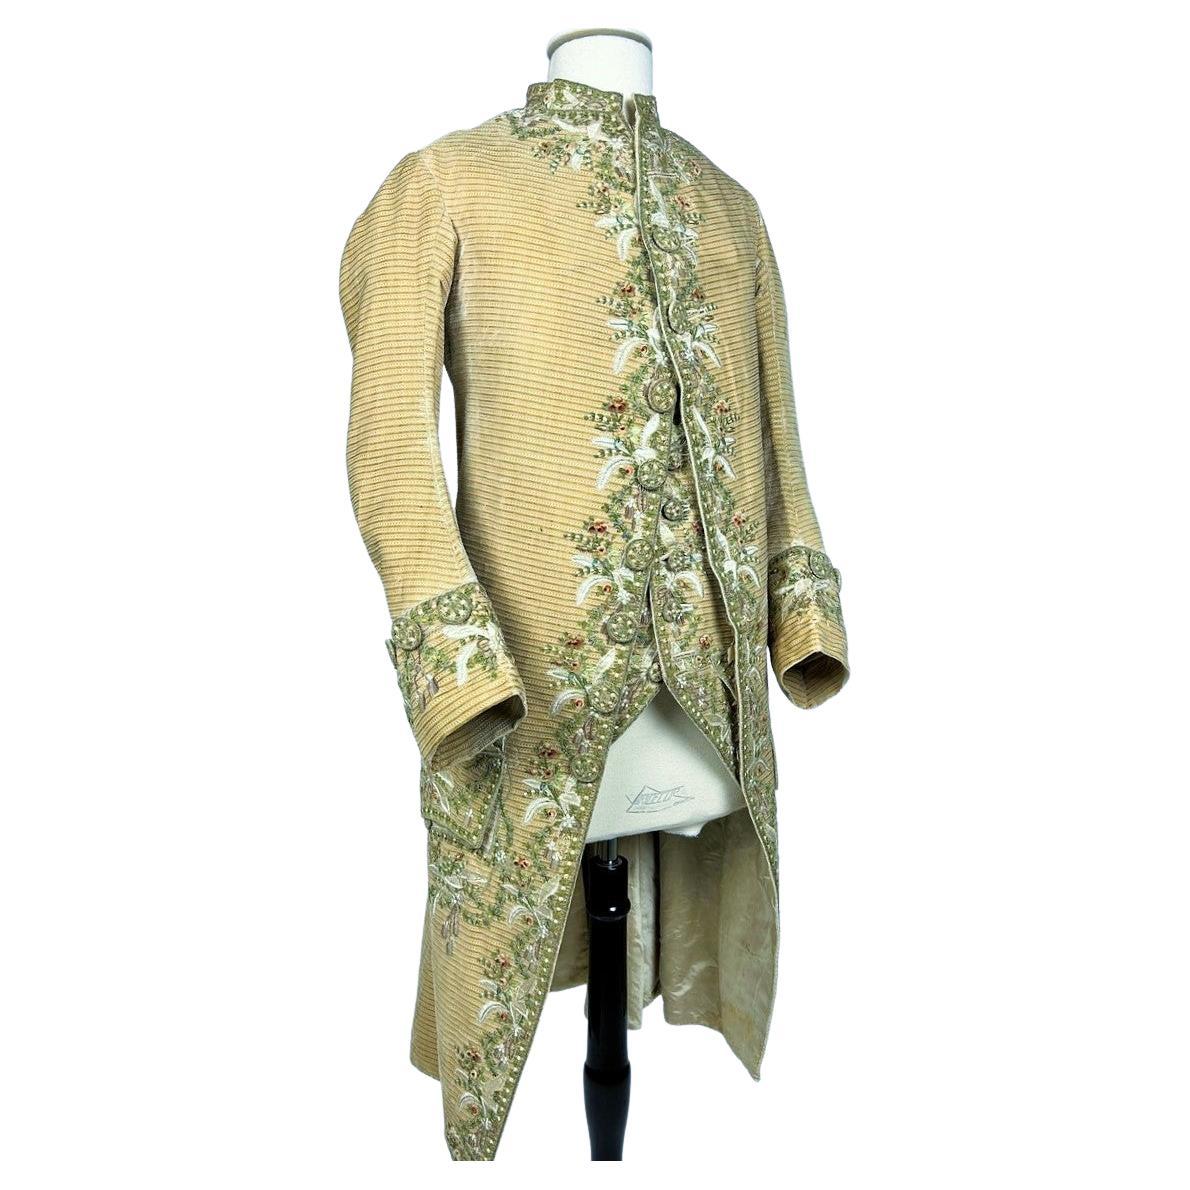 A French Embroidered Velvet Court Habit and Waistcoat Circa 1780